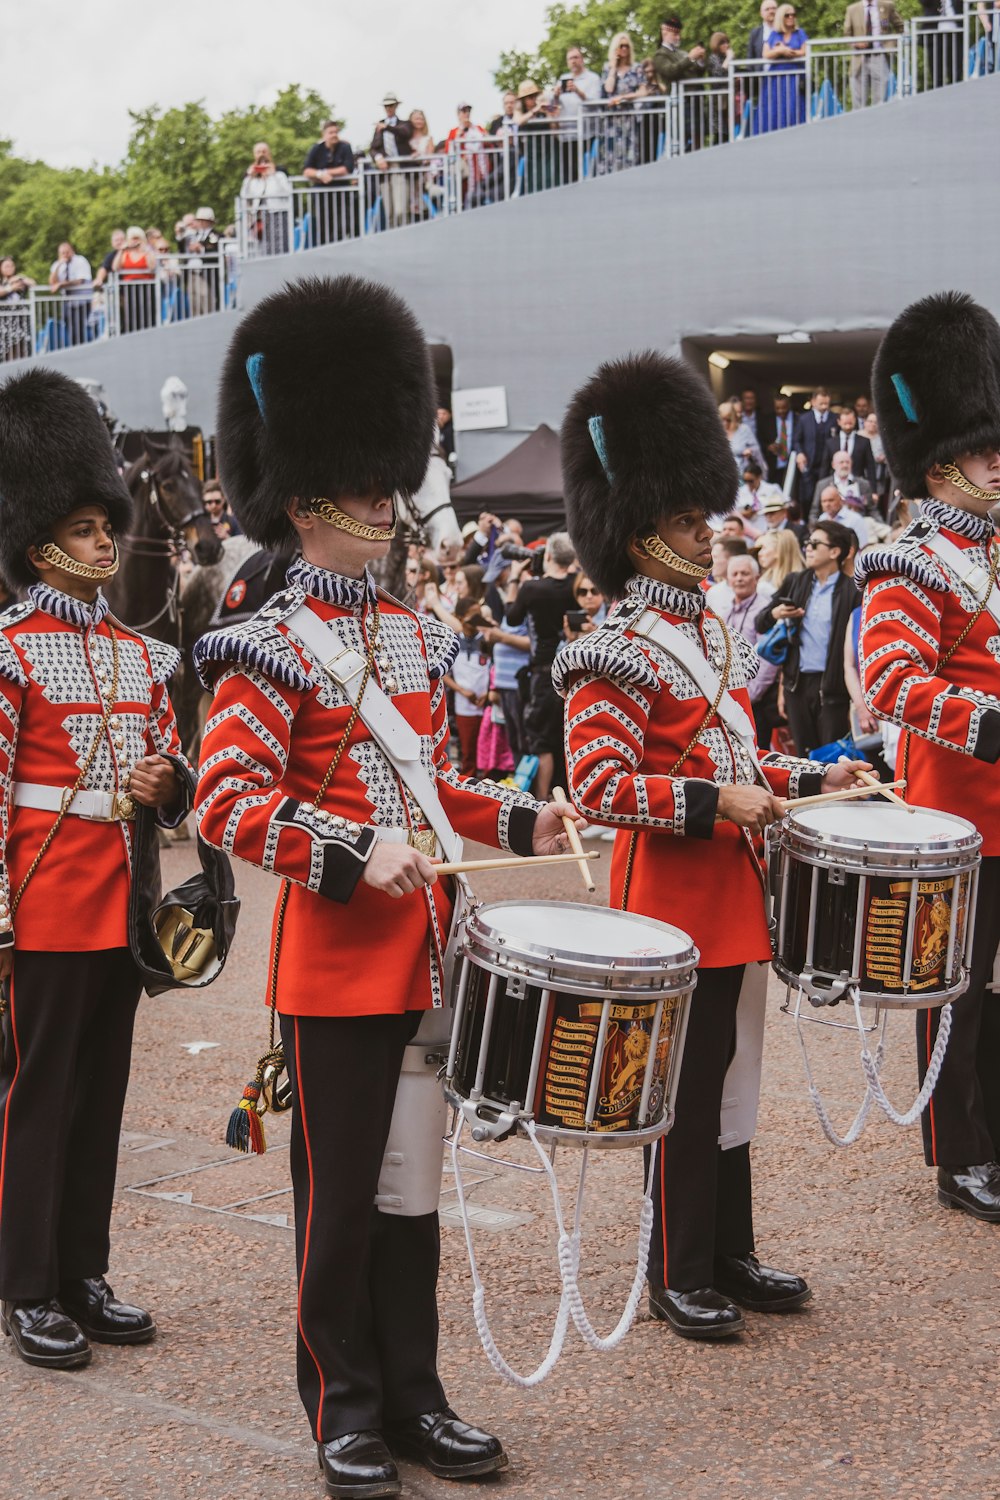 a group of men in uniform playing drums